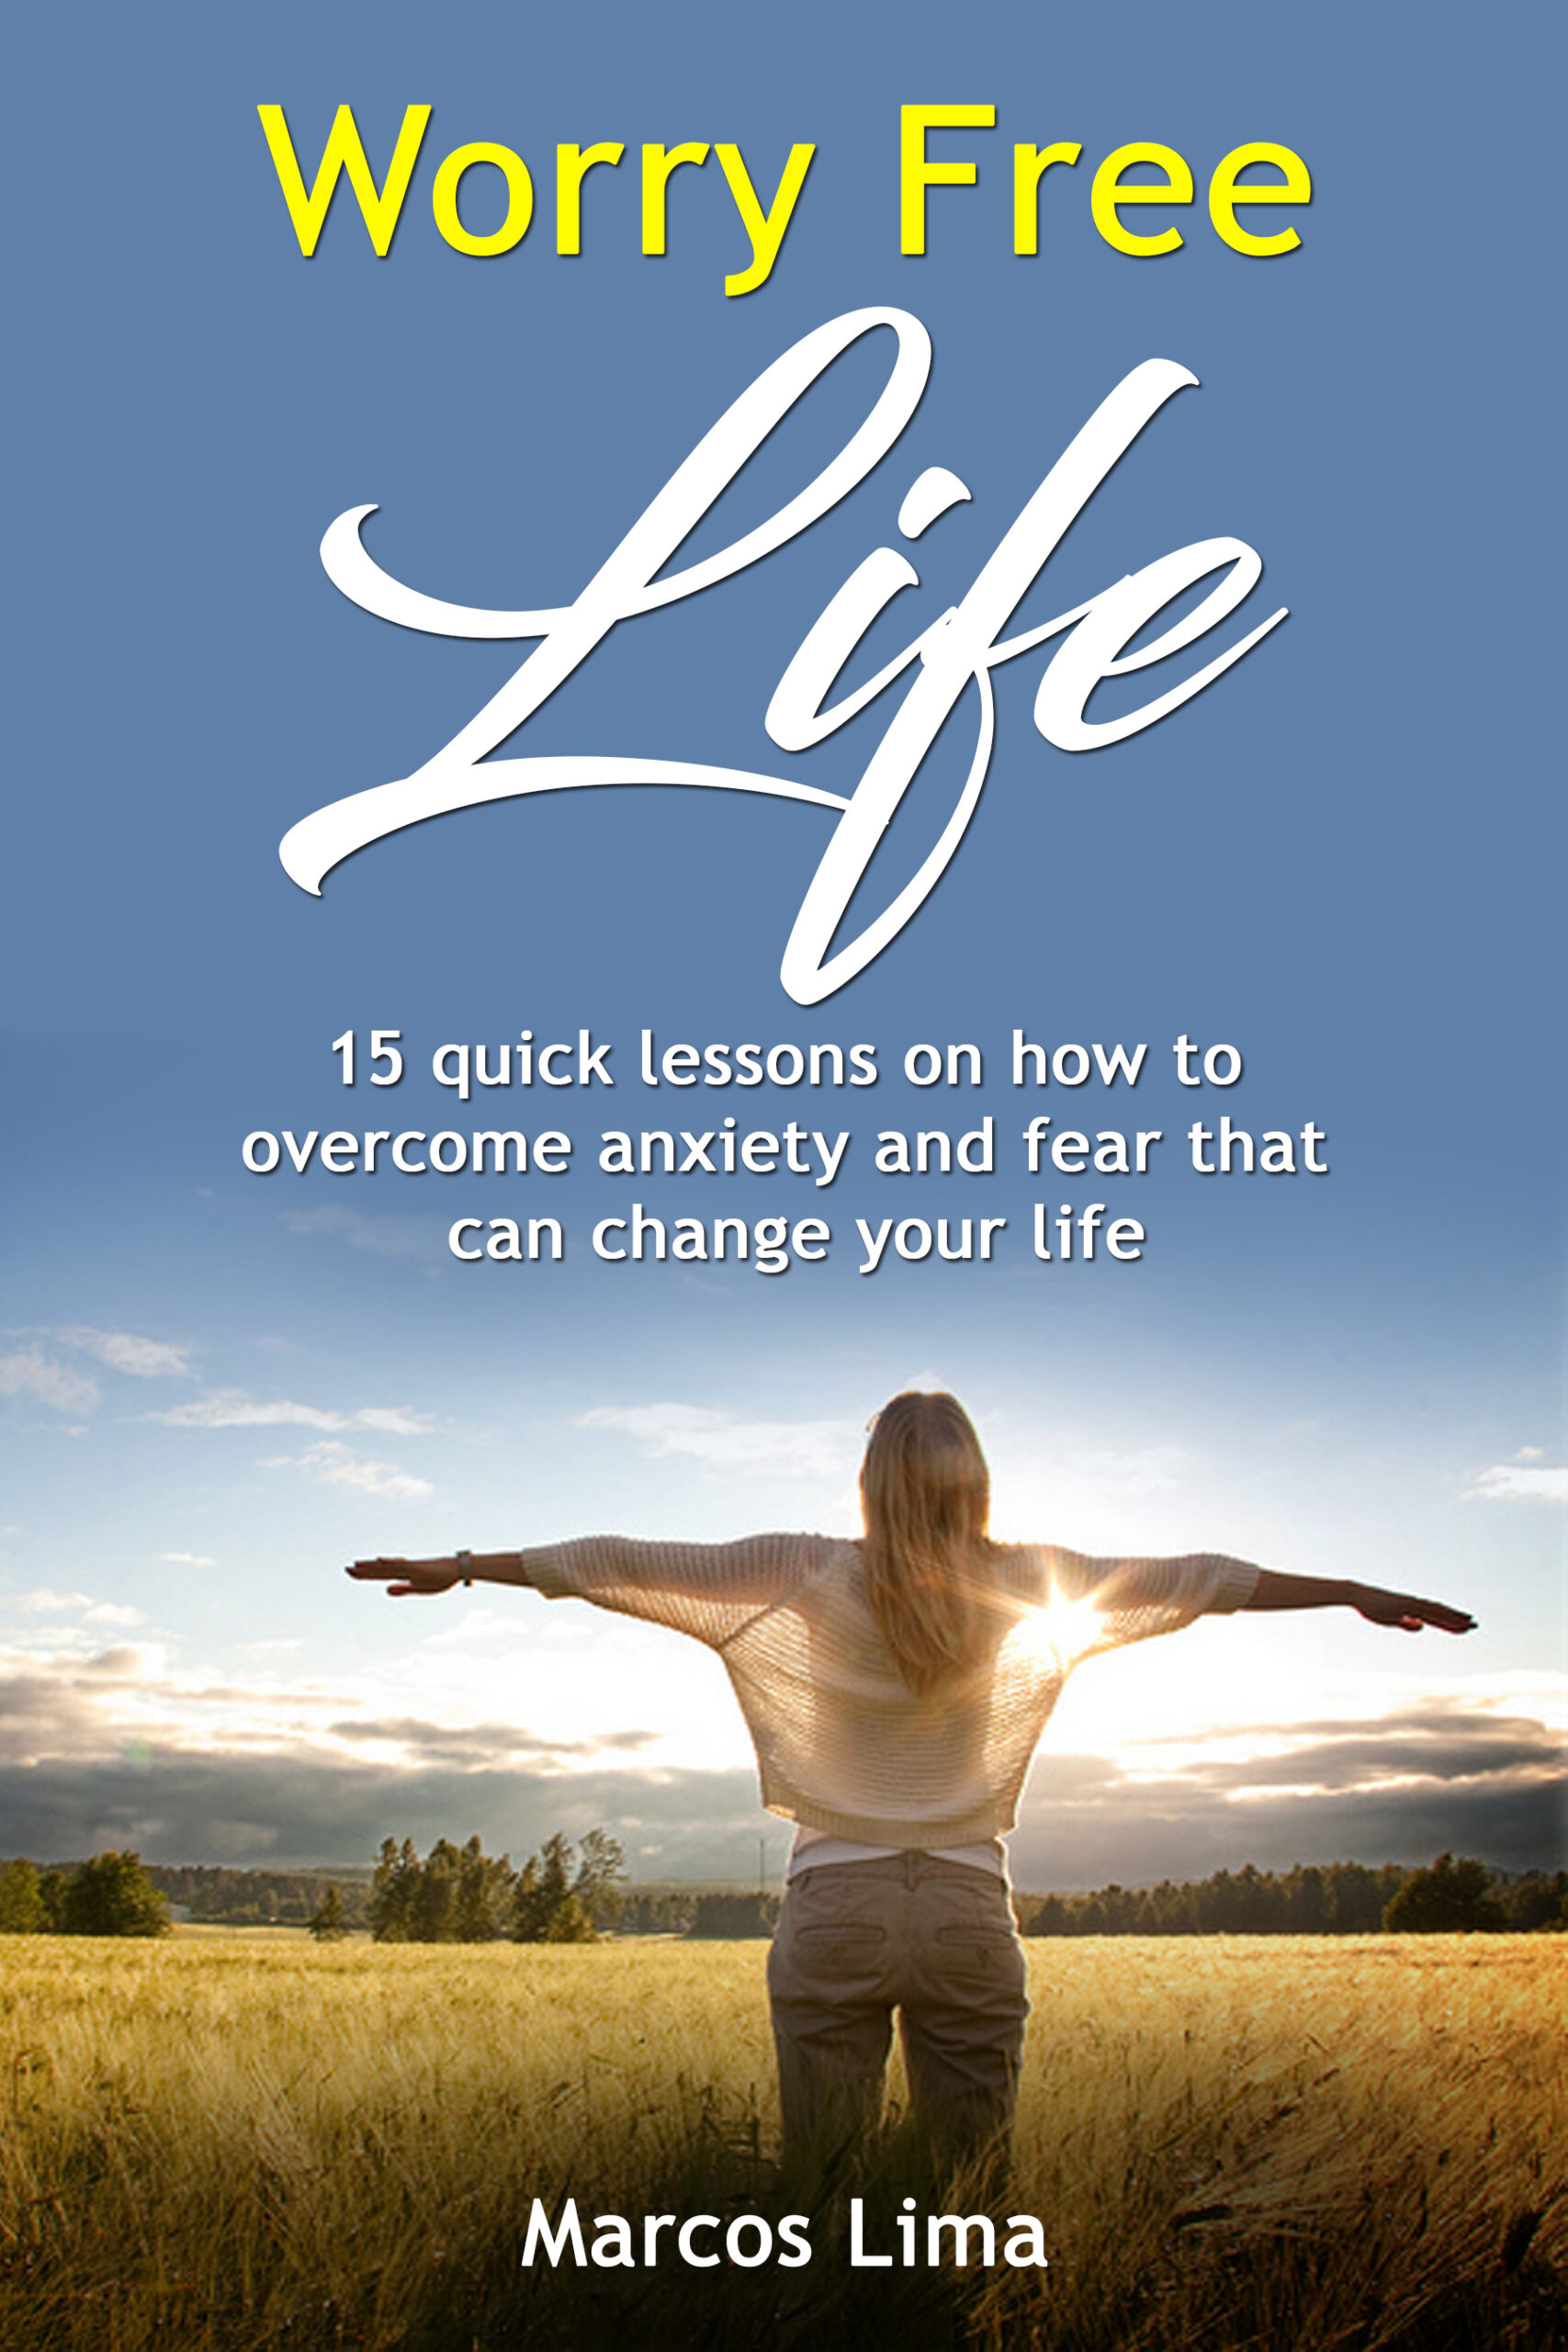 FREE: Worry Free Life: 15 Quick Lessons on How to Overcome Anxiety and Fear that can Change Your Life (Life Series book 1) by Marcos Lima